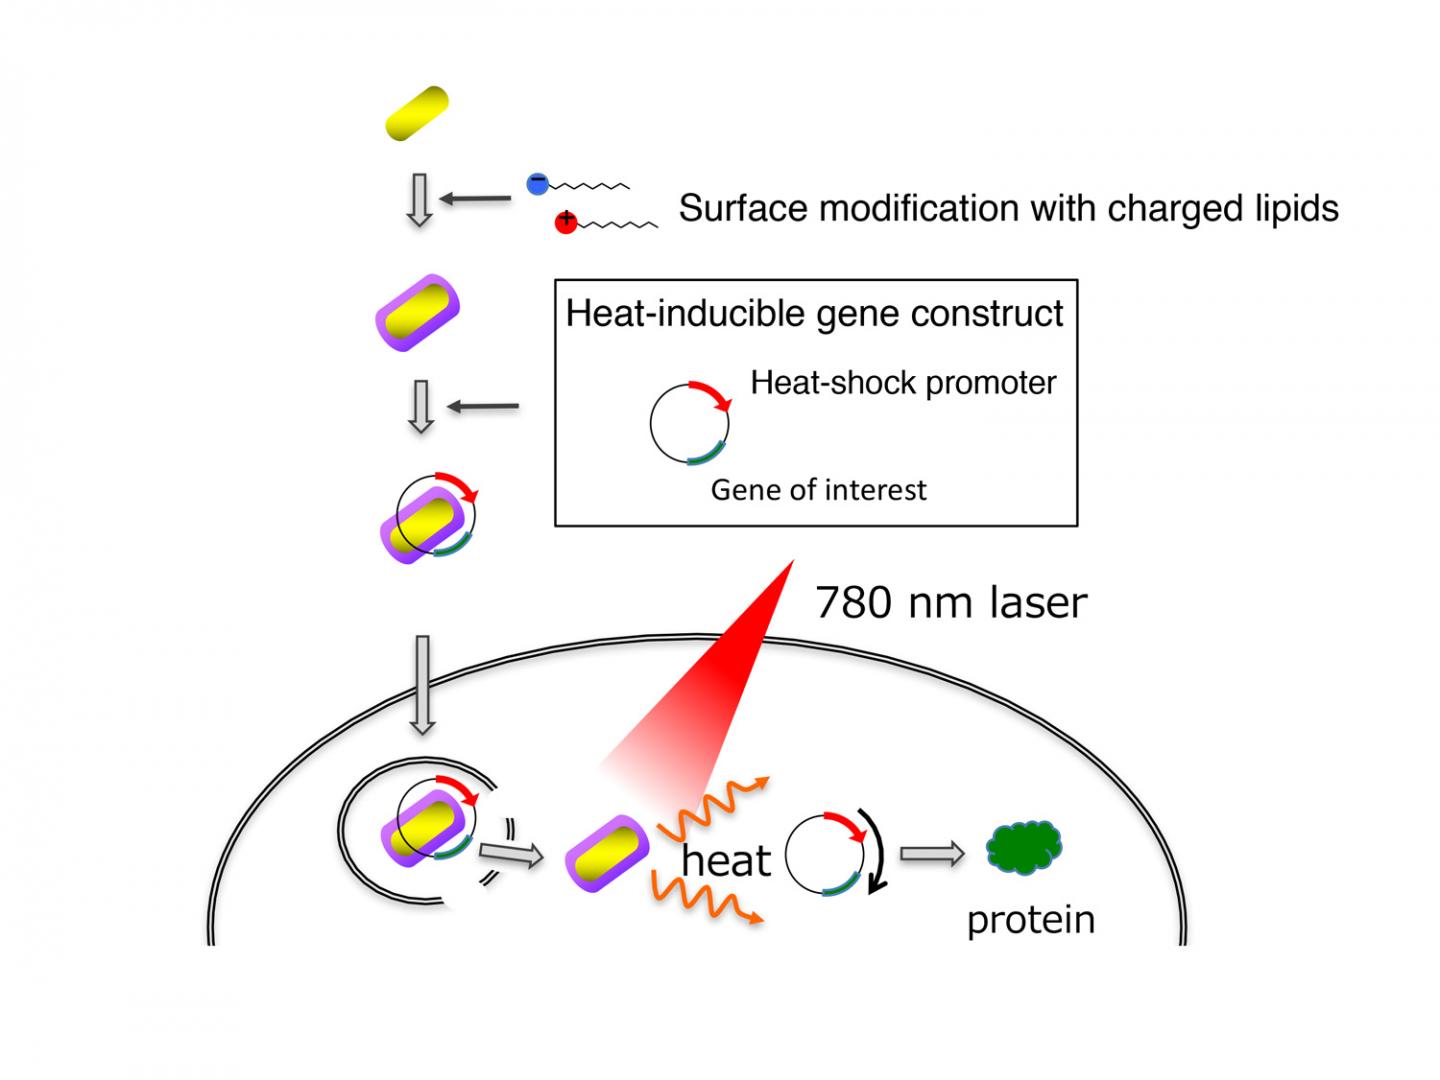 Delivery and activation of genes by gold nanorods. Gold nanorods coated with charged lipids efficiently bind to DNA and penetrate cells. The team designed an artificial gene that is turned on by heat generated by the gold nanorods upon exposure to near infrared light illumination. [Kyoto University iCeMS]